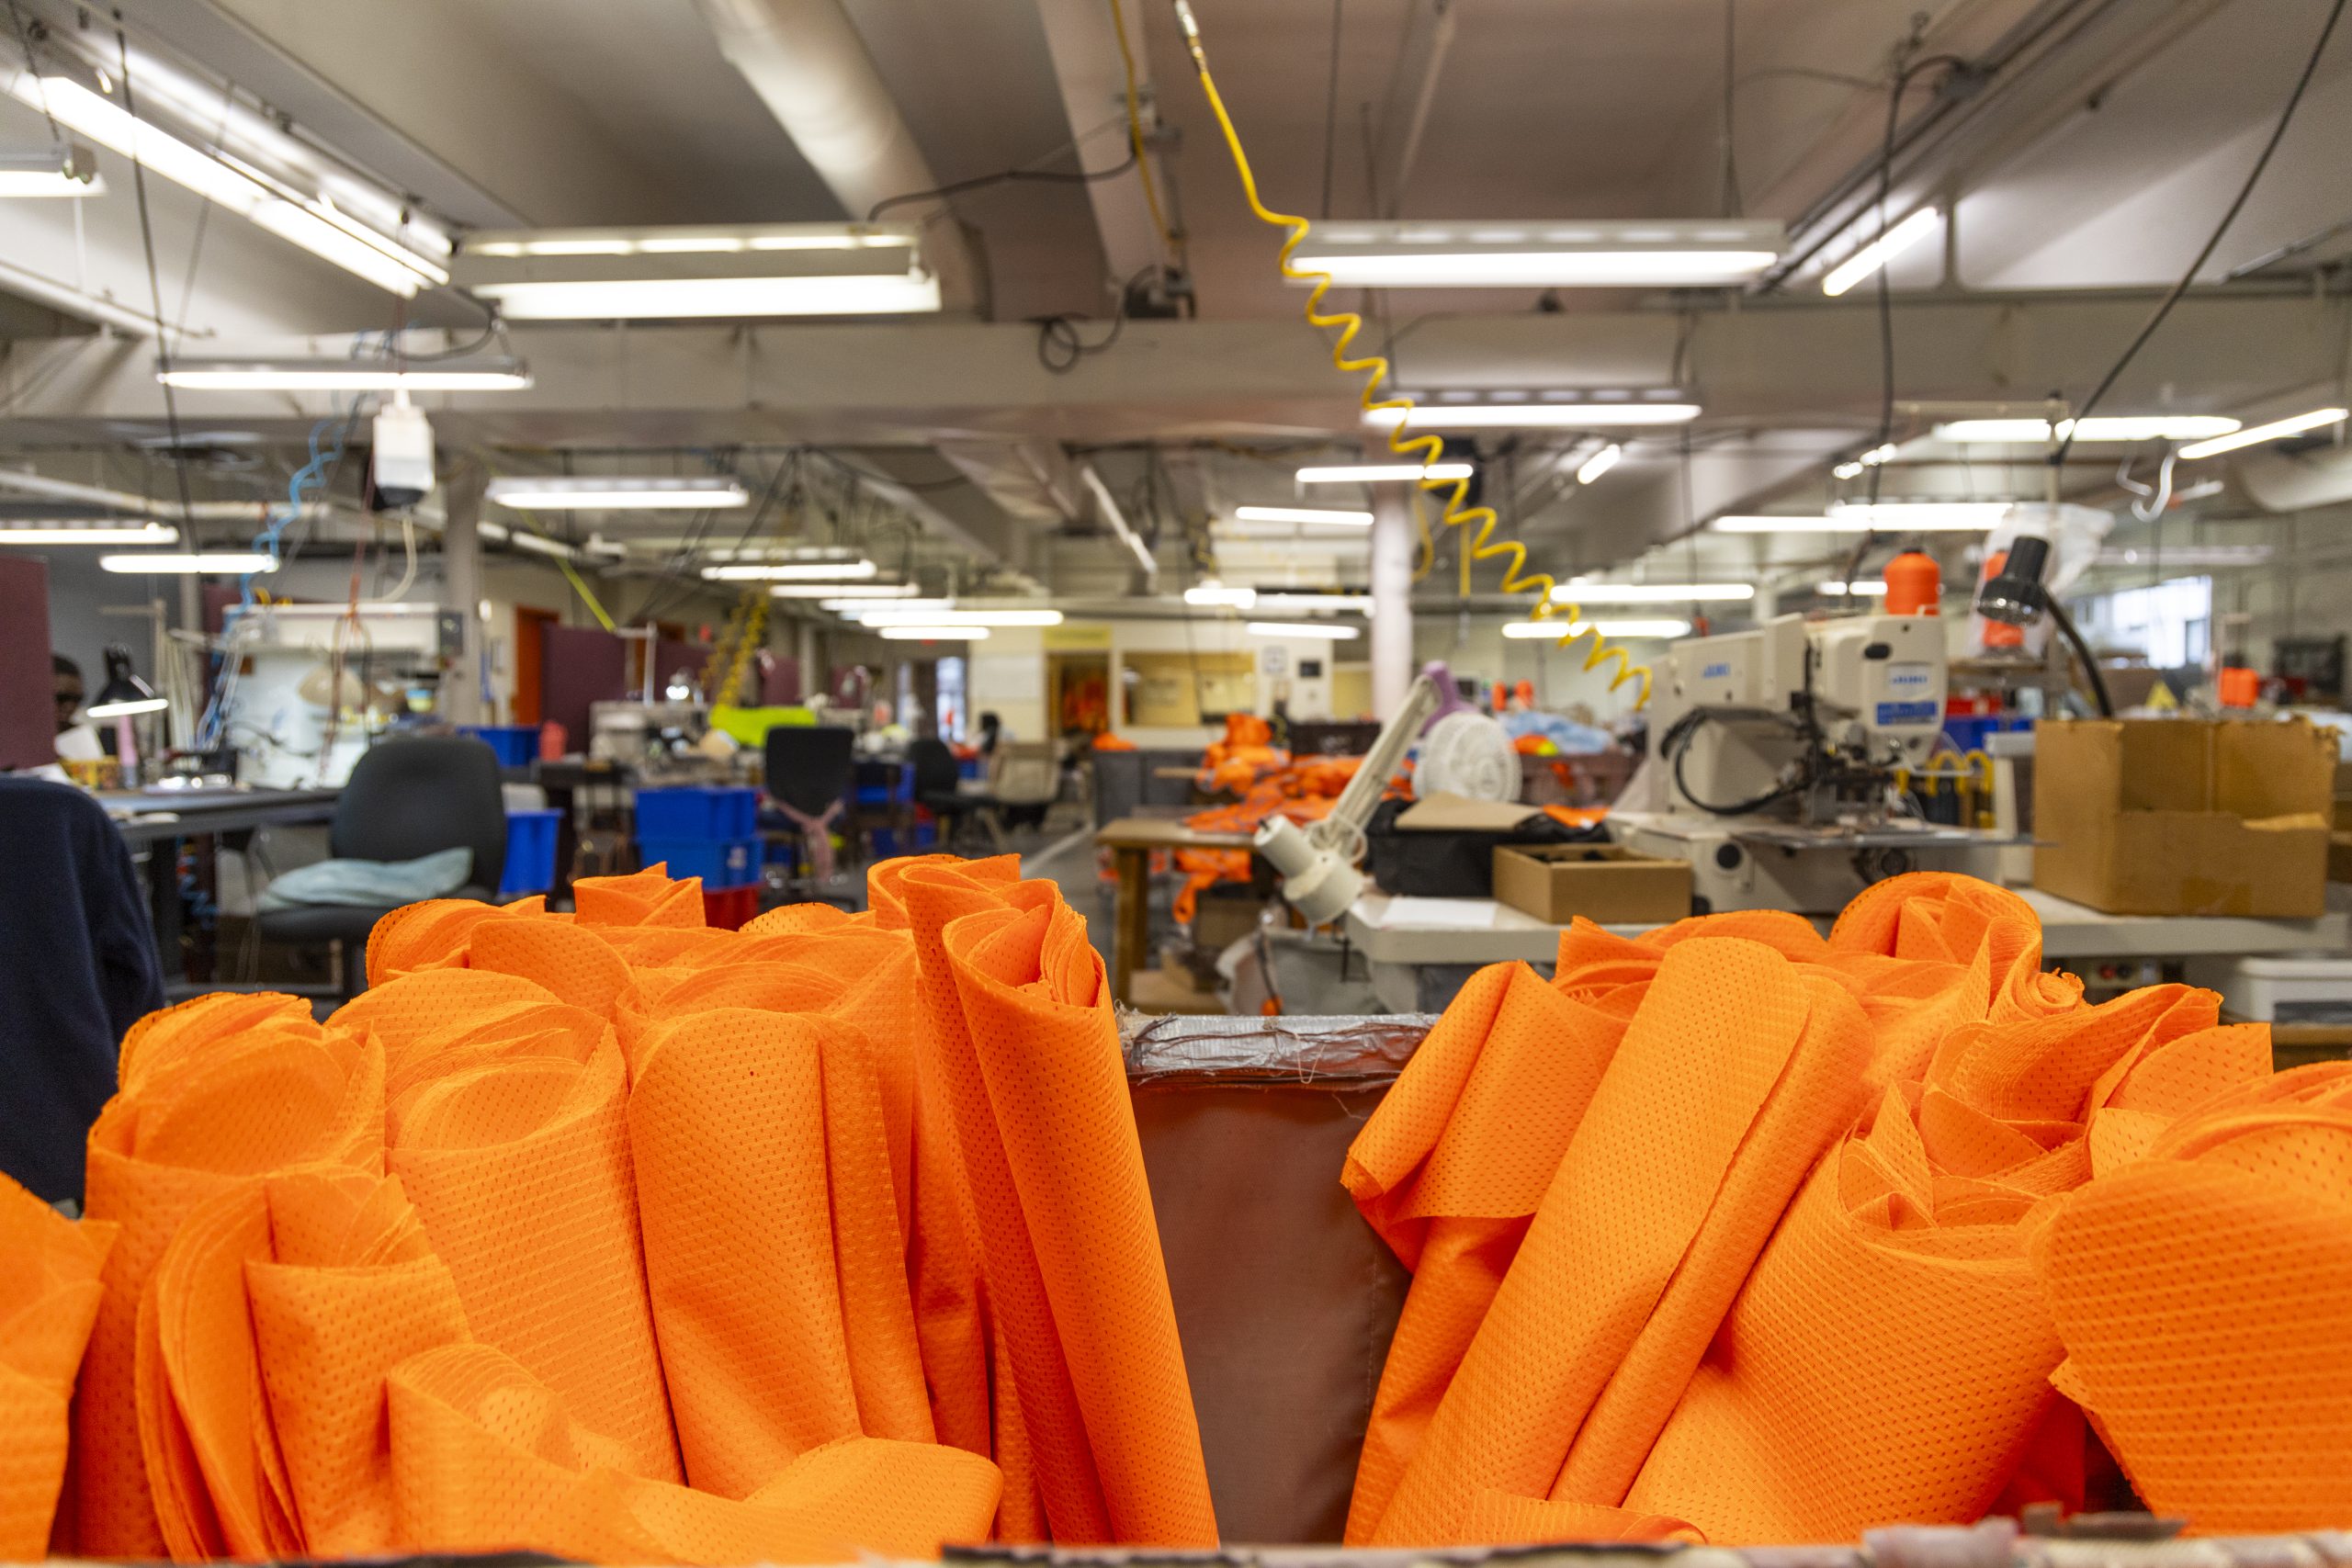 Fabric for MTA vests in manufacturing warehouse